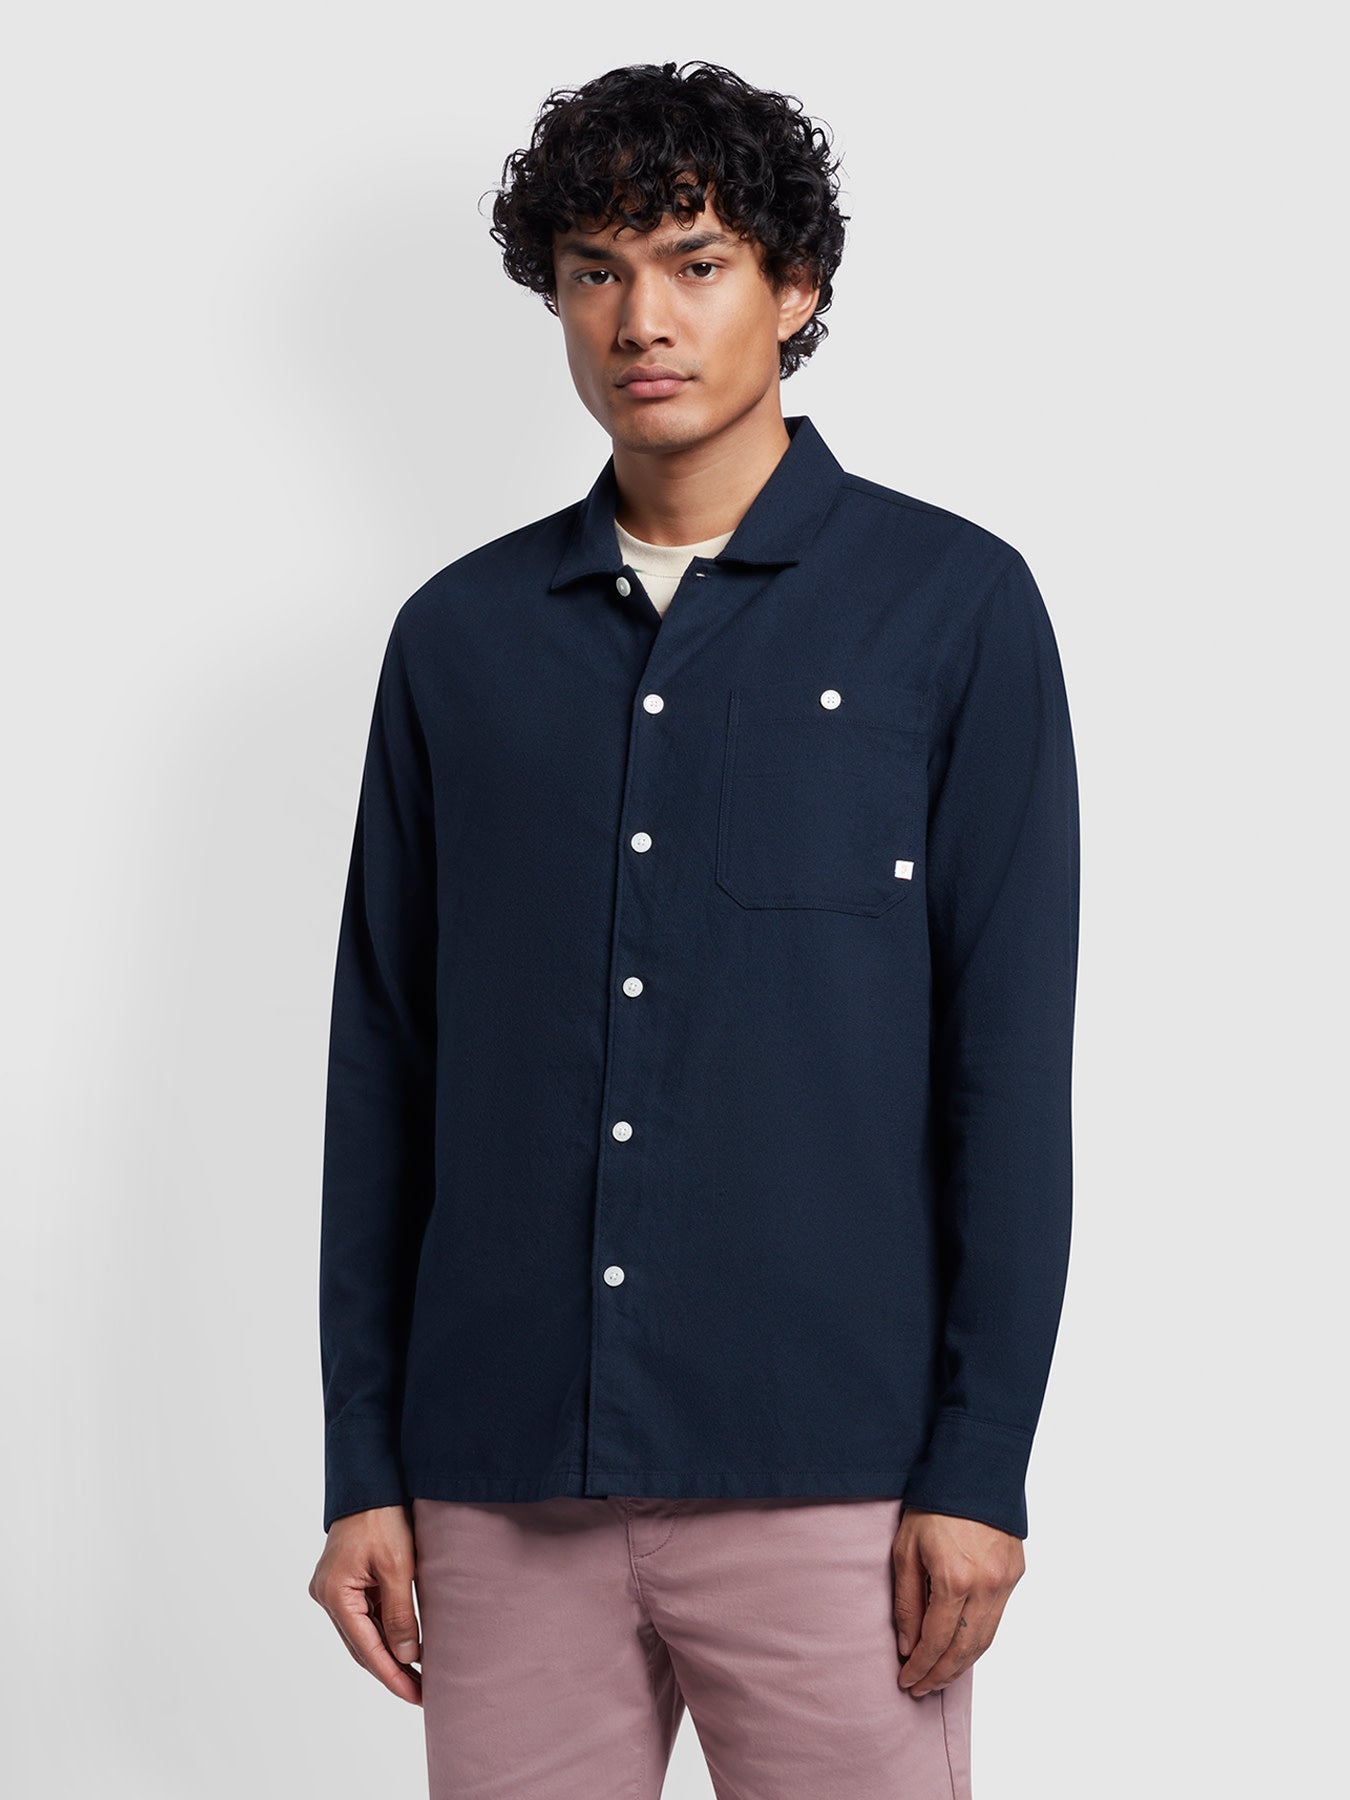 View Campbell Casual Fit Organic Cotton Plain Overshirt In True Navy information